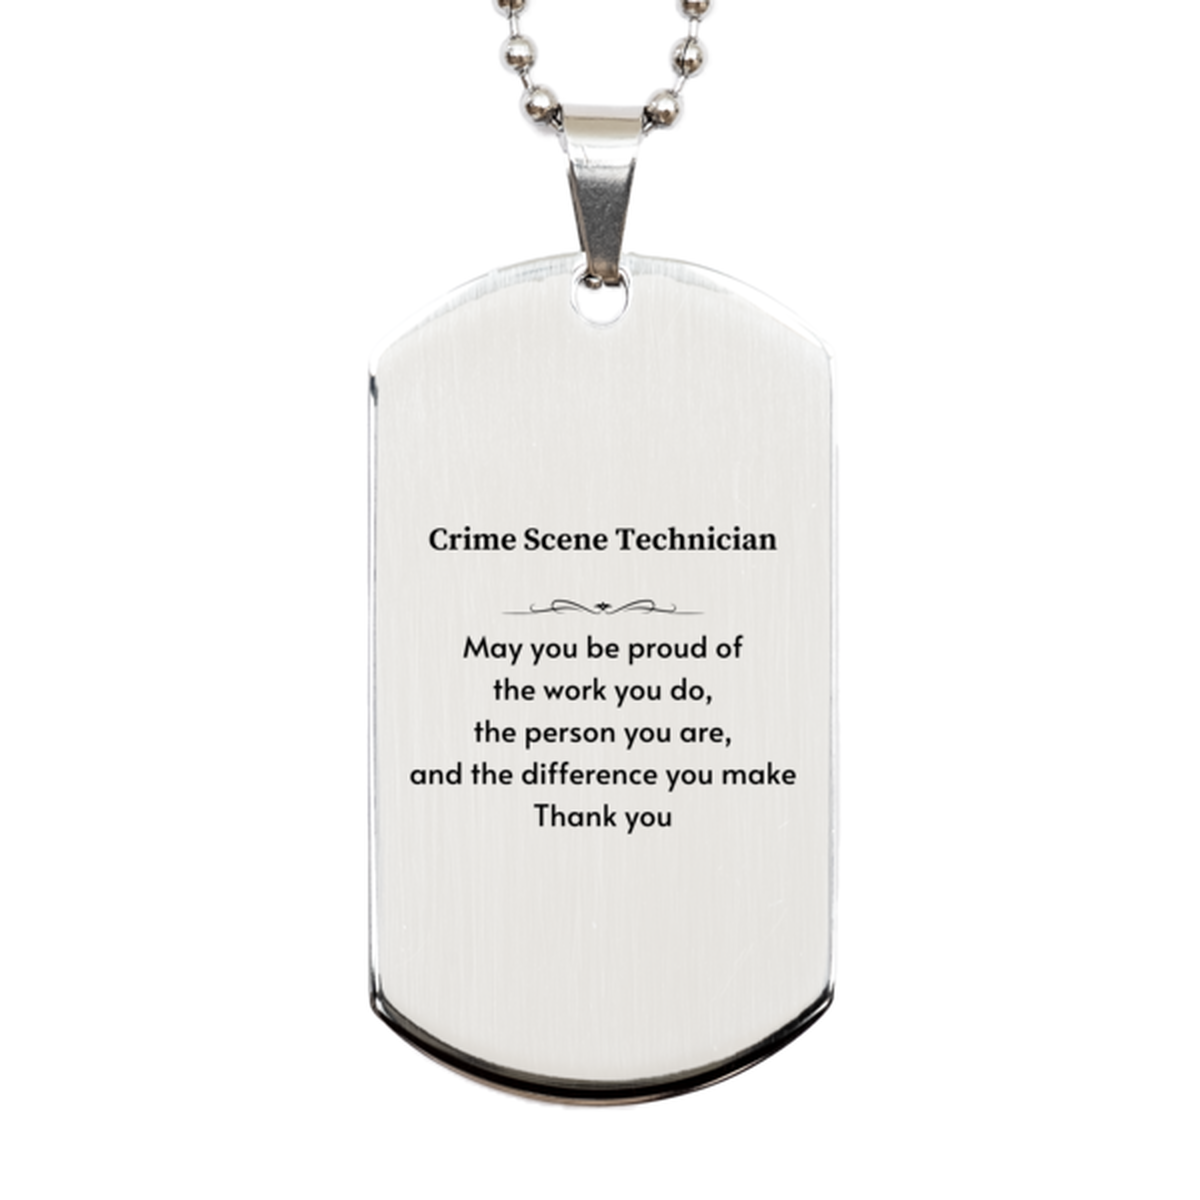 Heartwarming Silver Dog Tag Retirement Coworkers Gifts for Crime Scene Technician, Crime Scene Technician May You be proud of the work you do, the person you are Gifts for Boss Men Women Friends